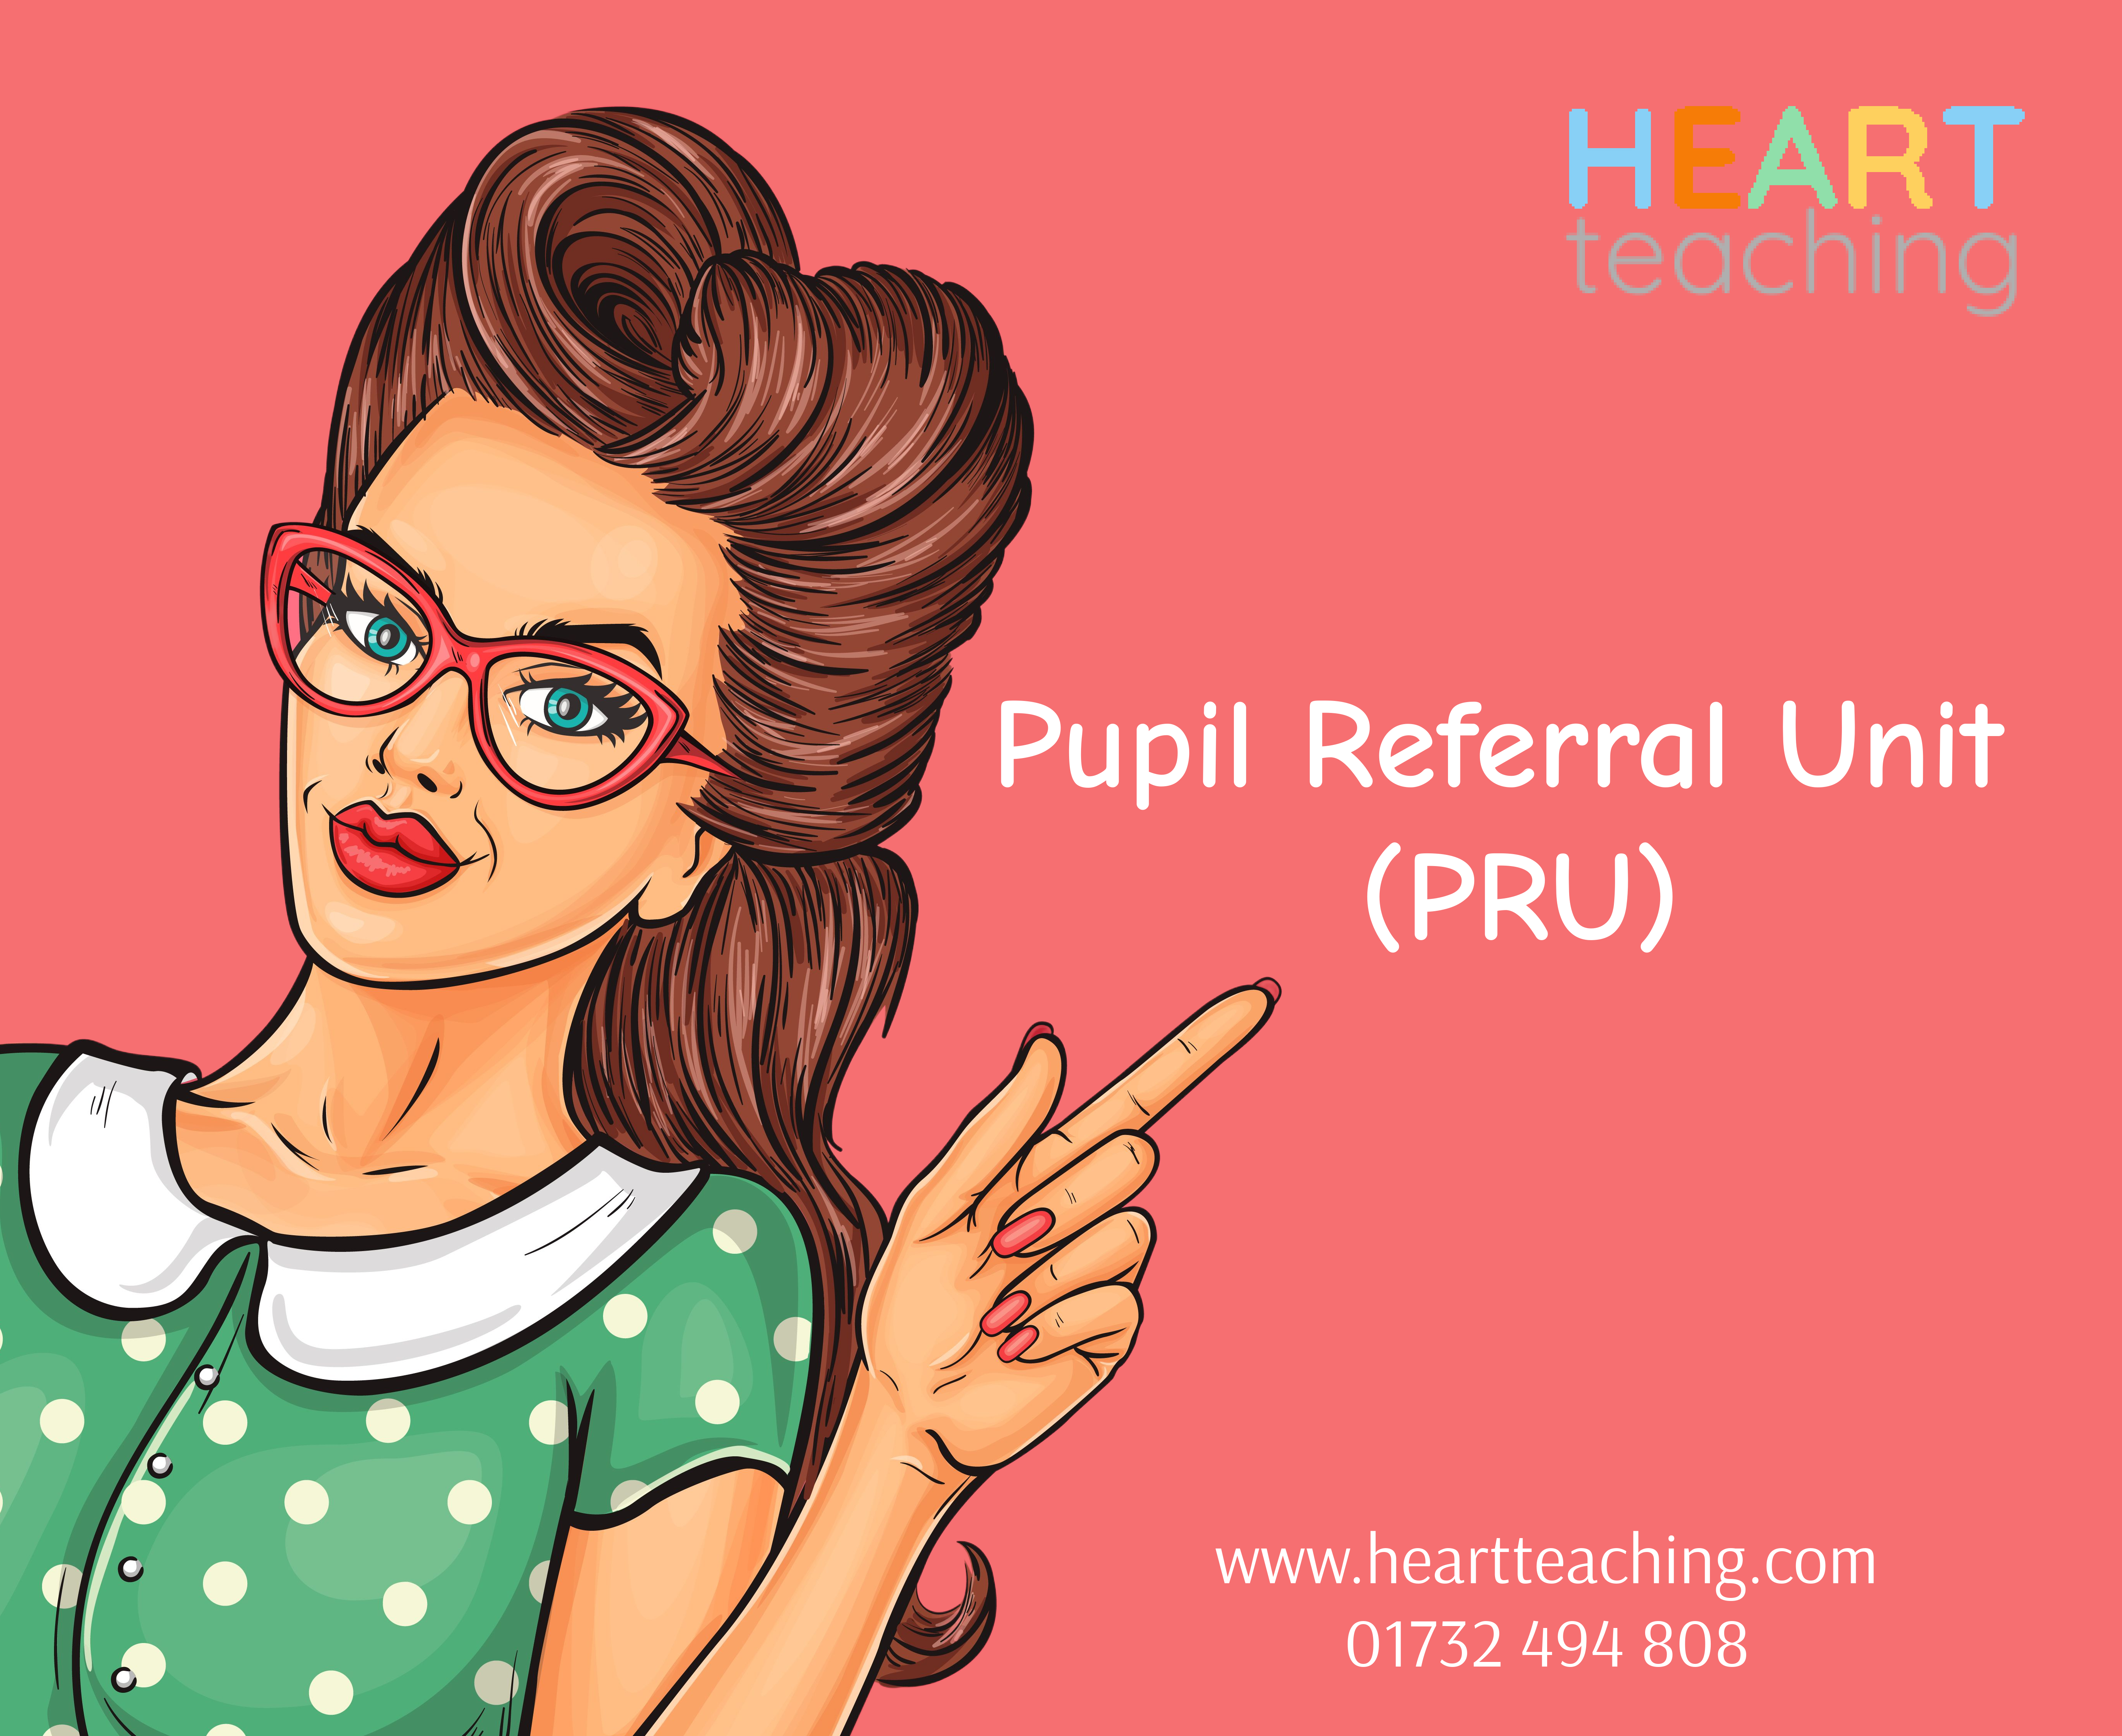 A Pupil Referral Unit (PRU) Key Things To Know